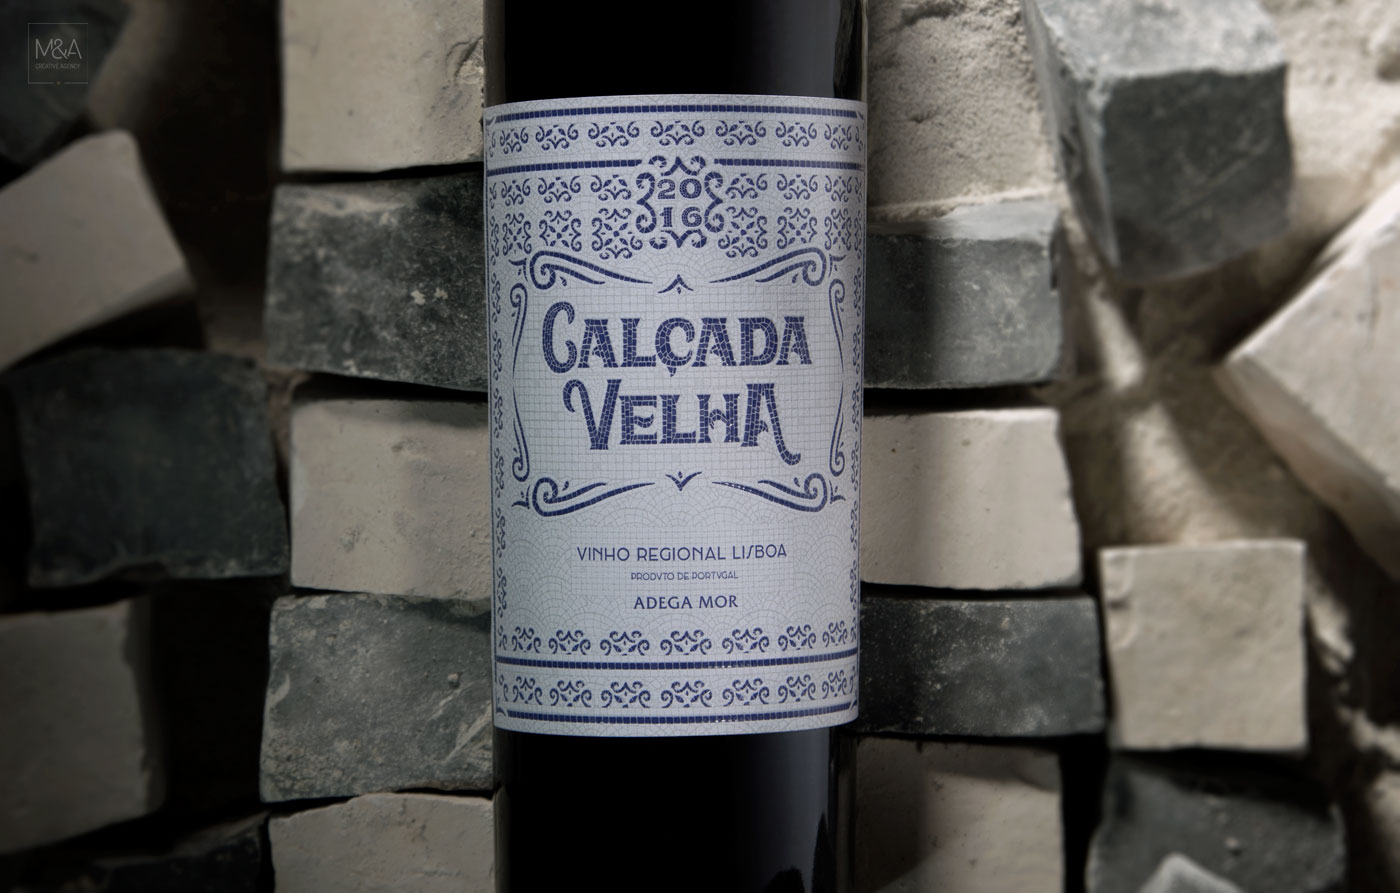 M&A Creative Agency Illustrates One of the Greatest Treasures of Portuguese Culture in Label